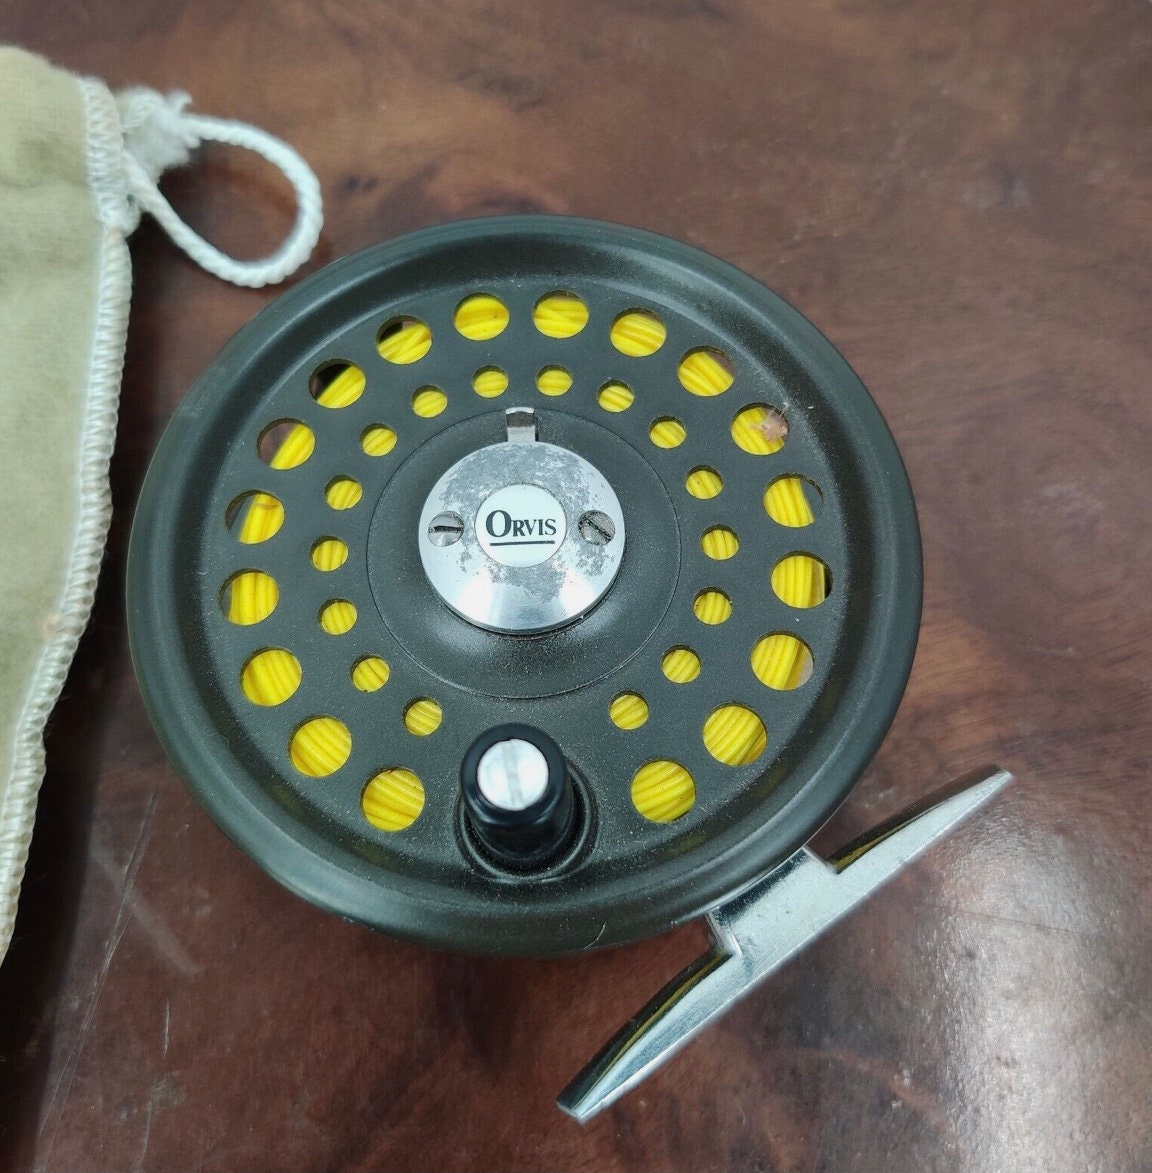 Pre-Owned Orvis Madison lll Fly Reel w/Orvis Bag